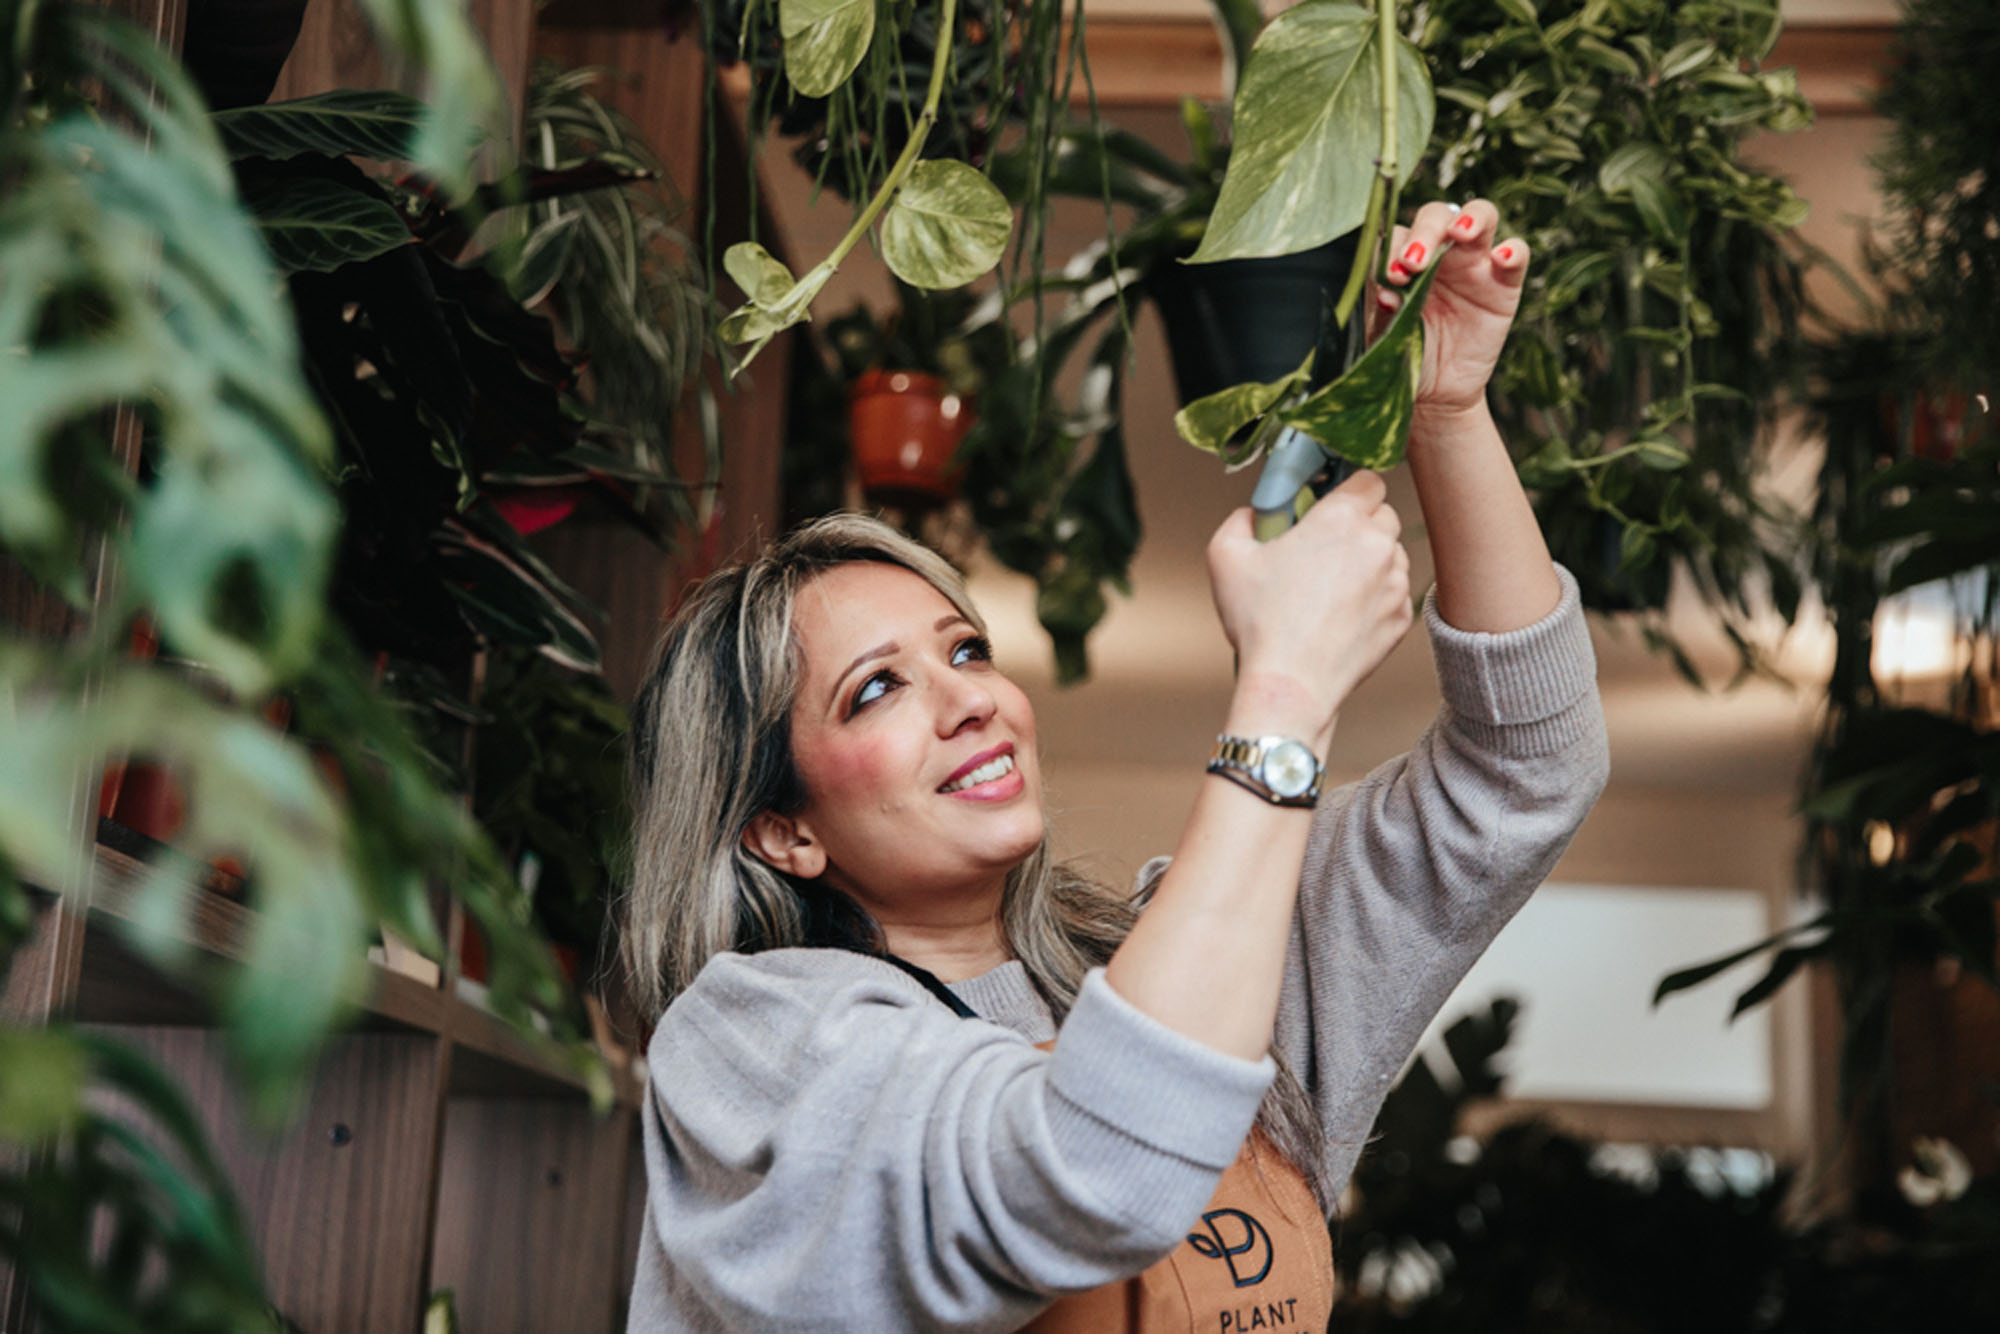 Shop assistant pruning hanging plants